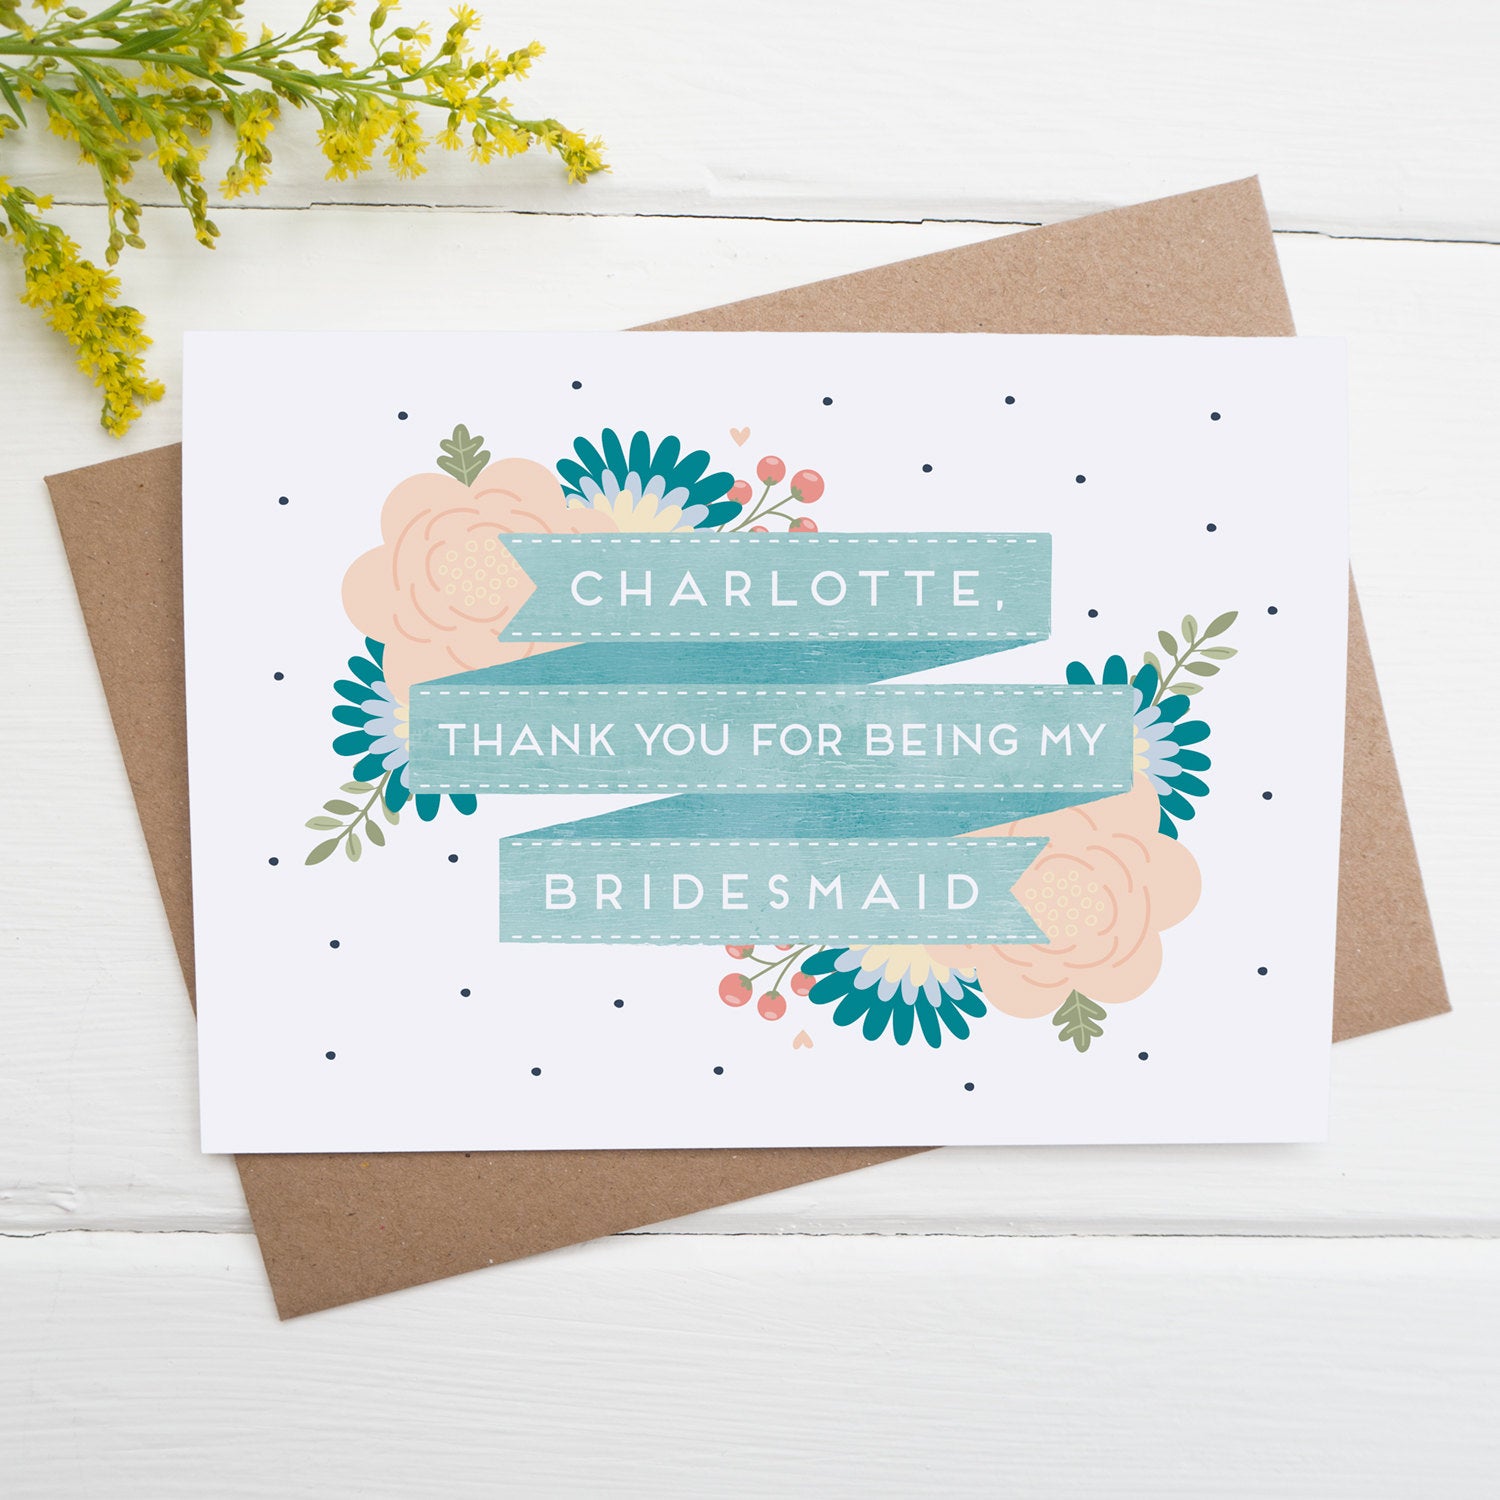 Personalised thank you for being my bridesmaid card in blue